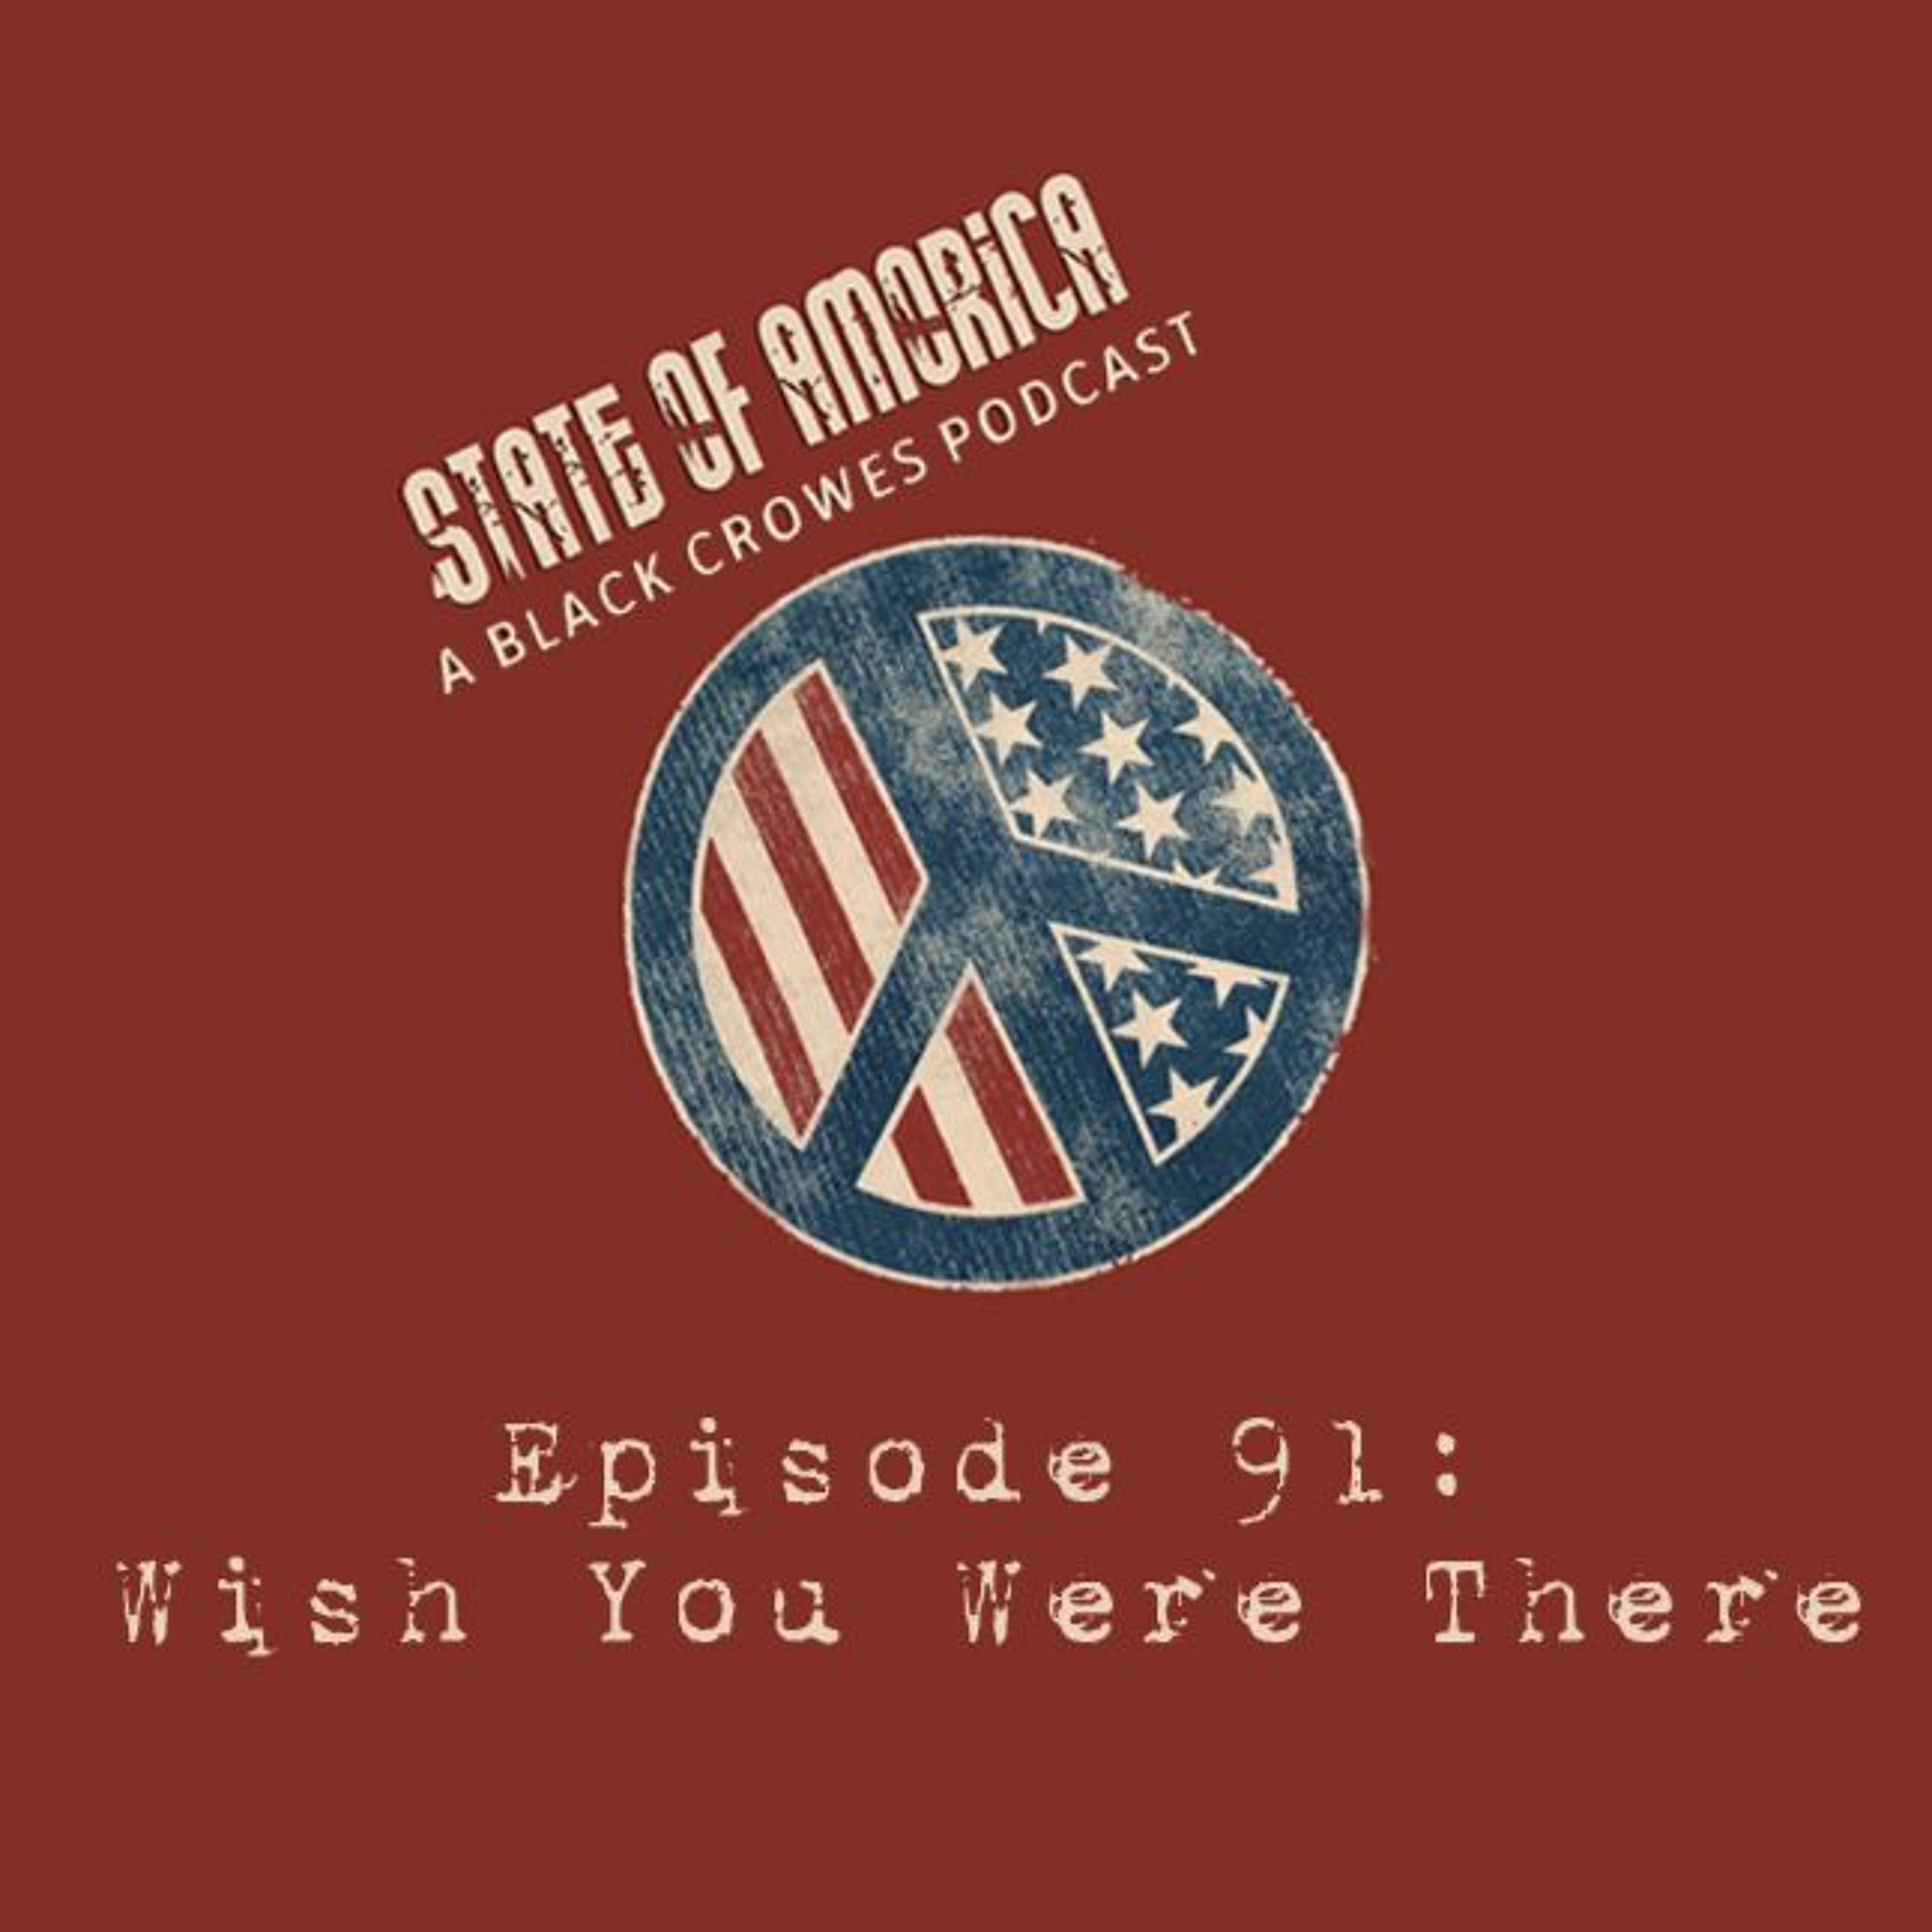 Episode 91: Wish You Were There